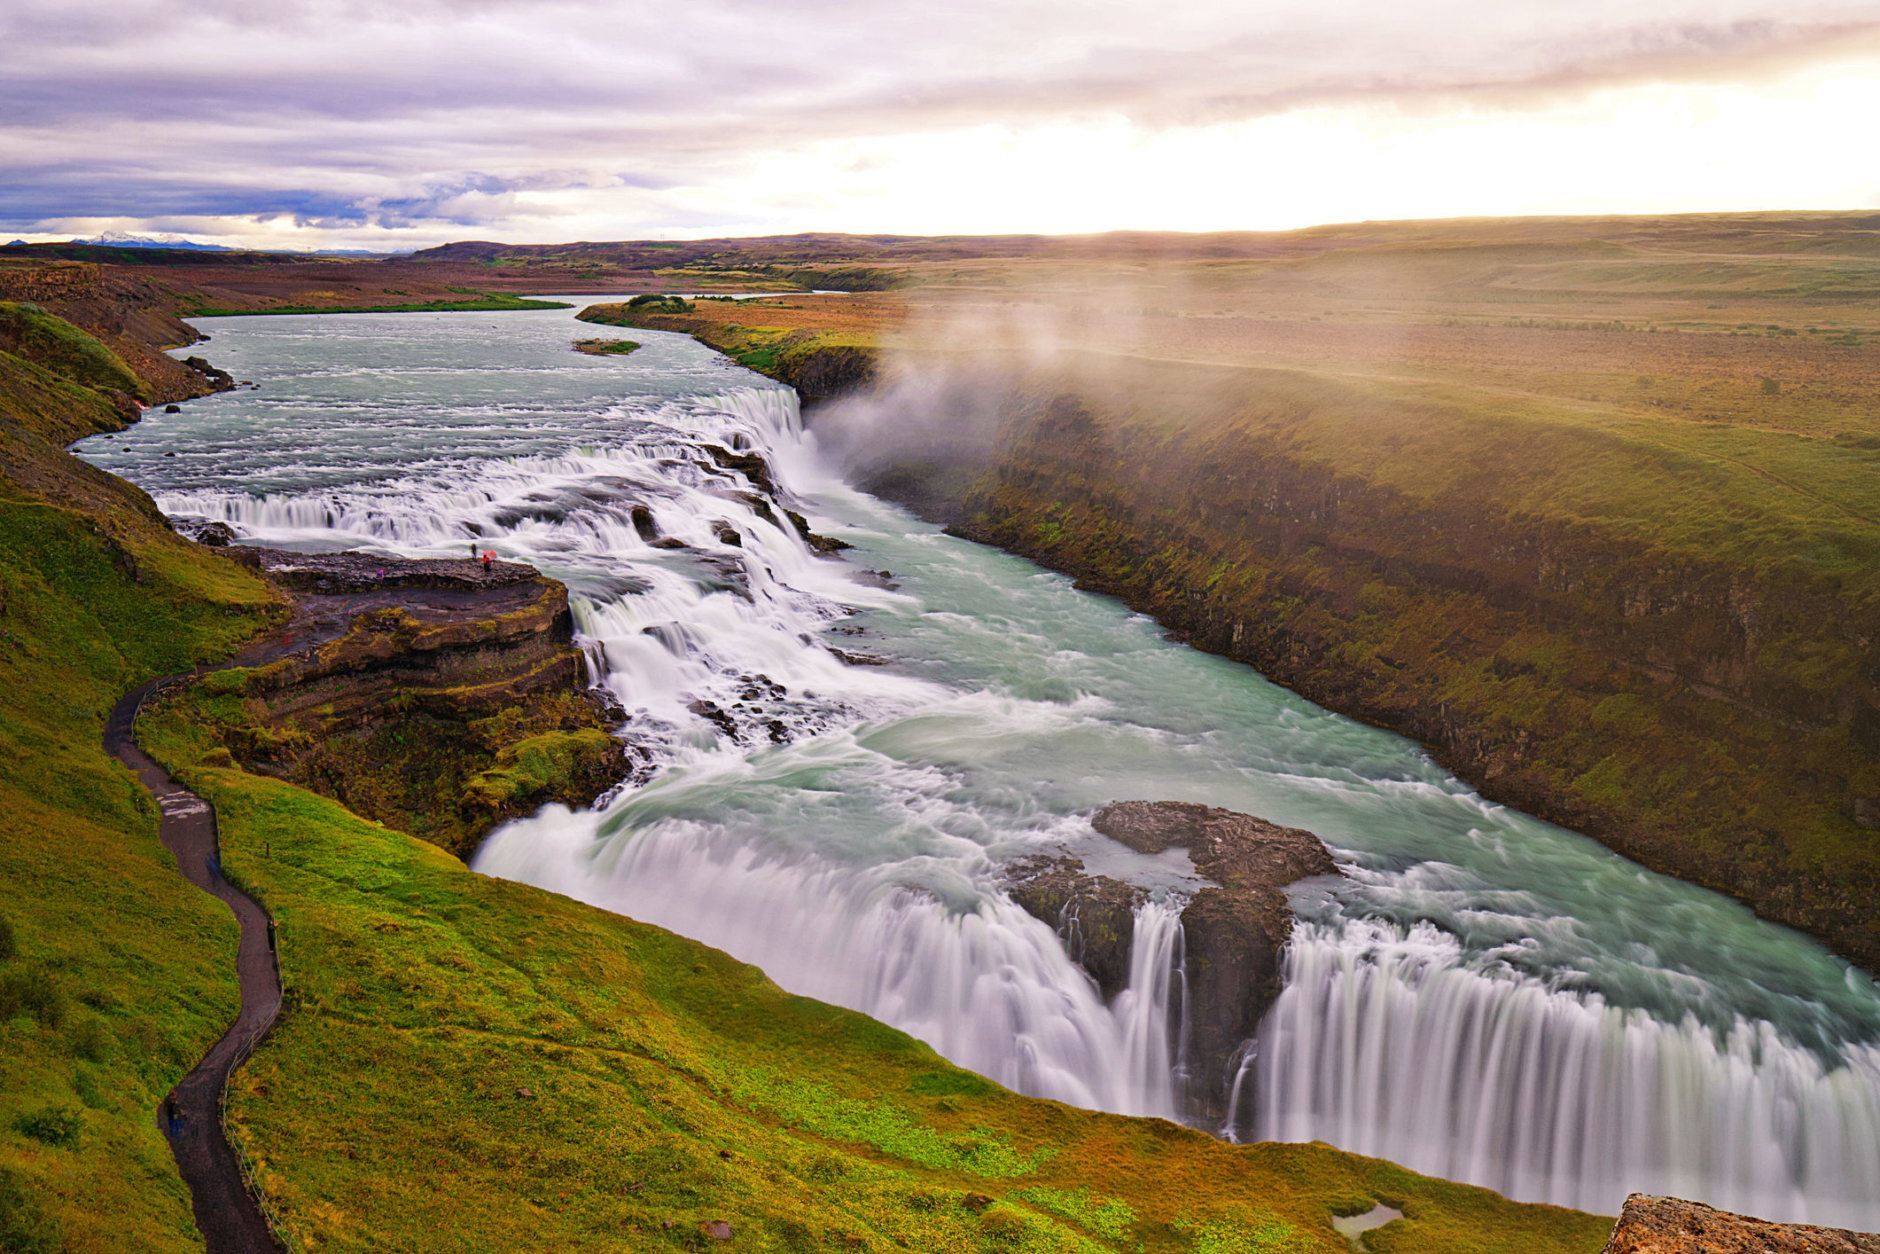 The immense power and grandeur of Gullfoss Waterfall in Iceland exhibits different moods.